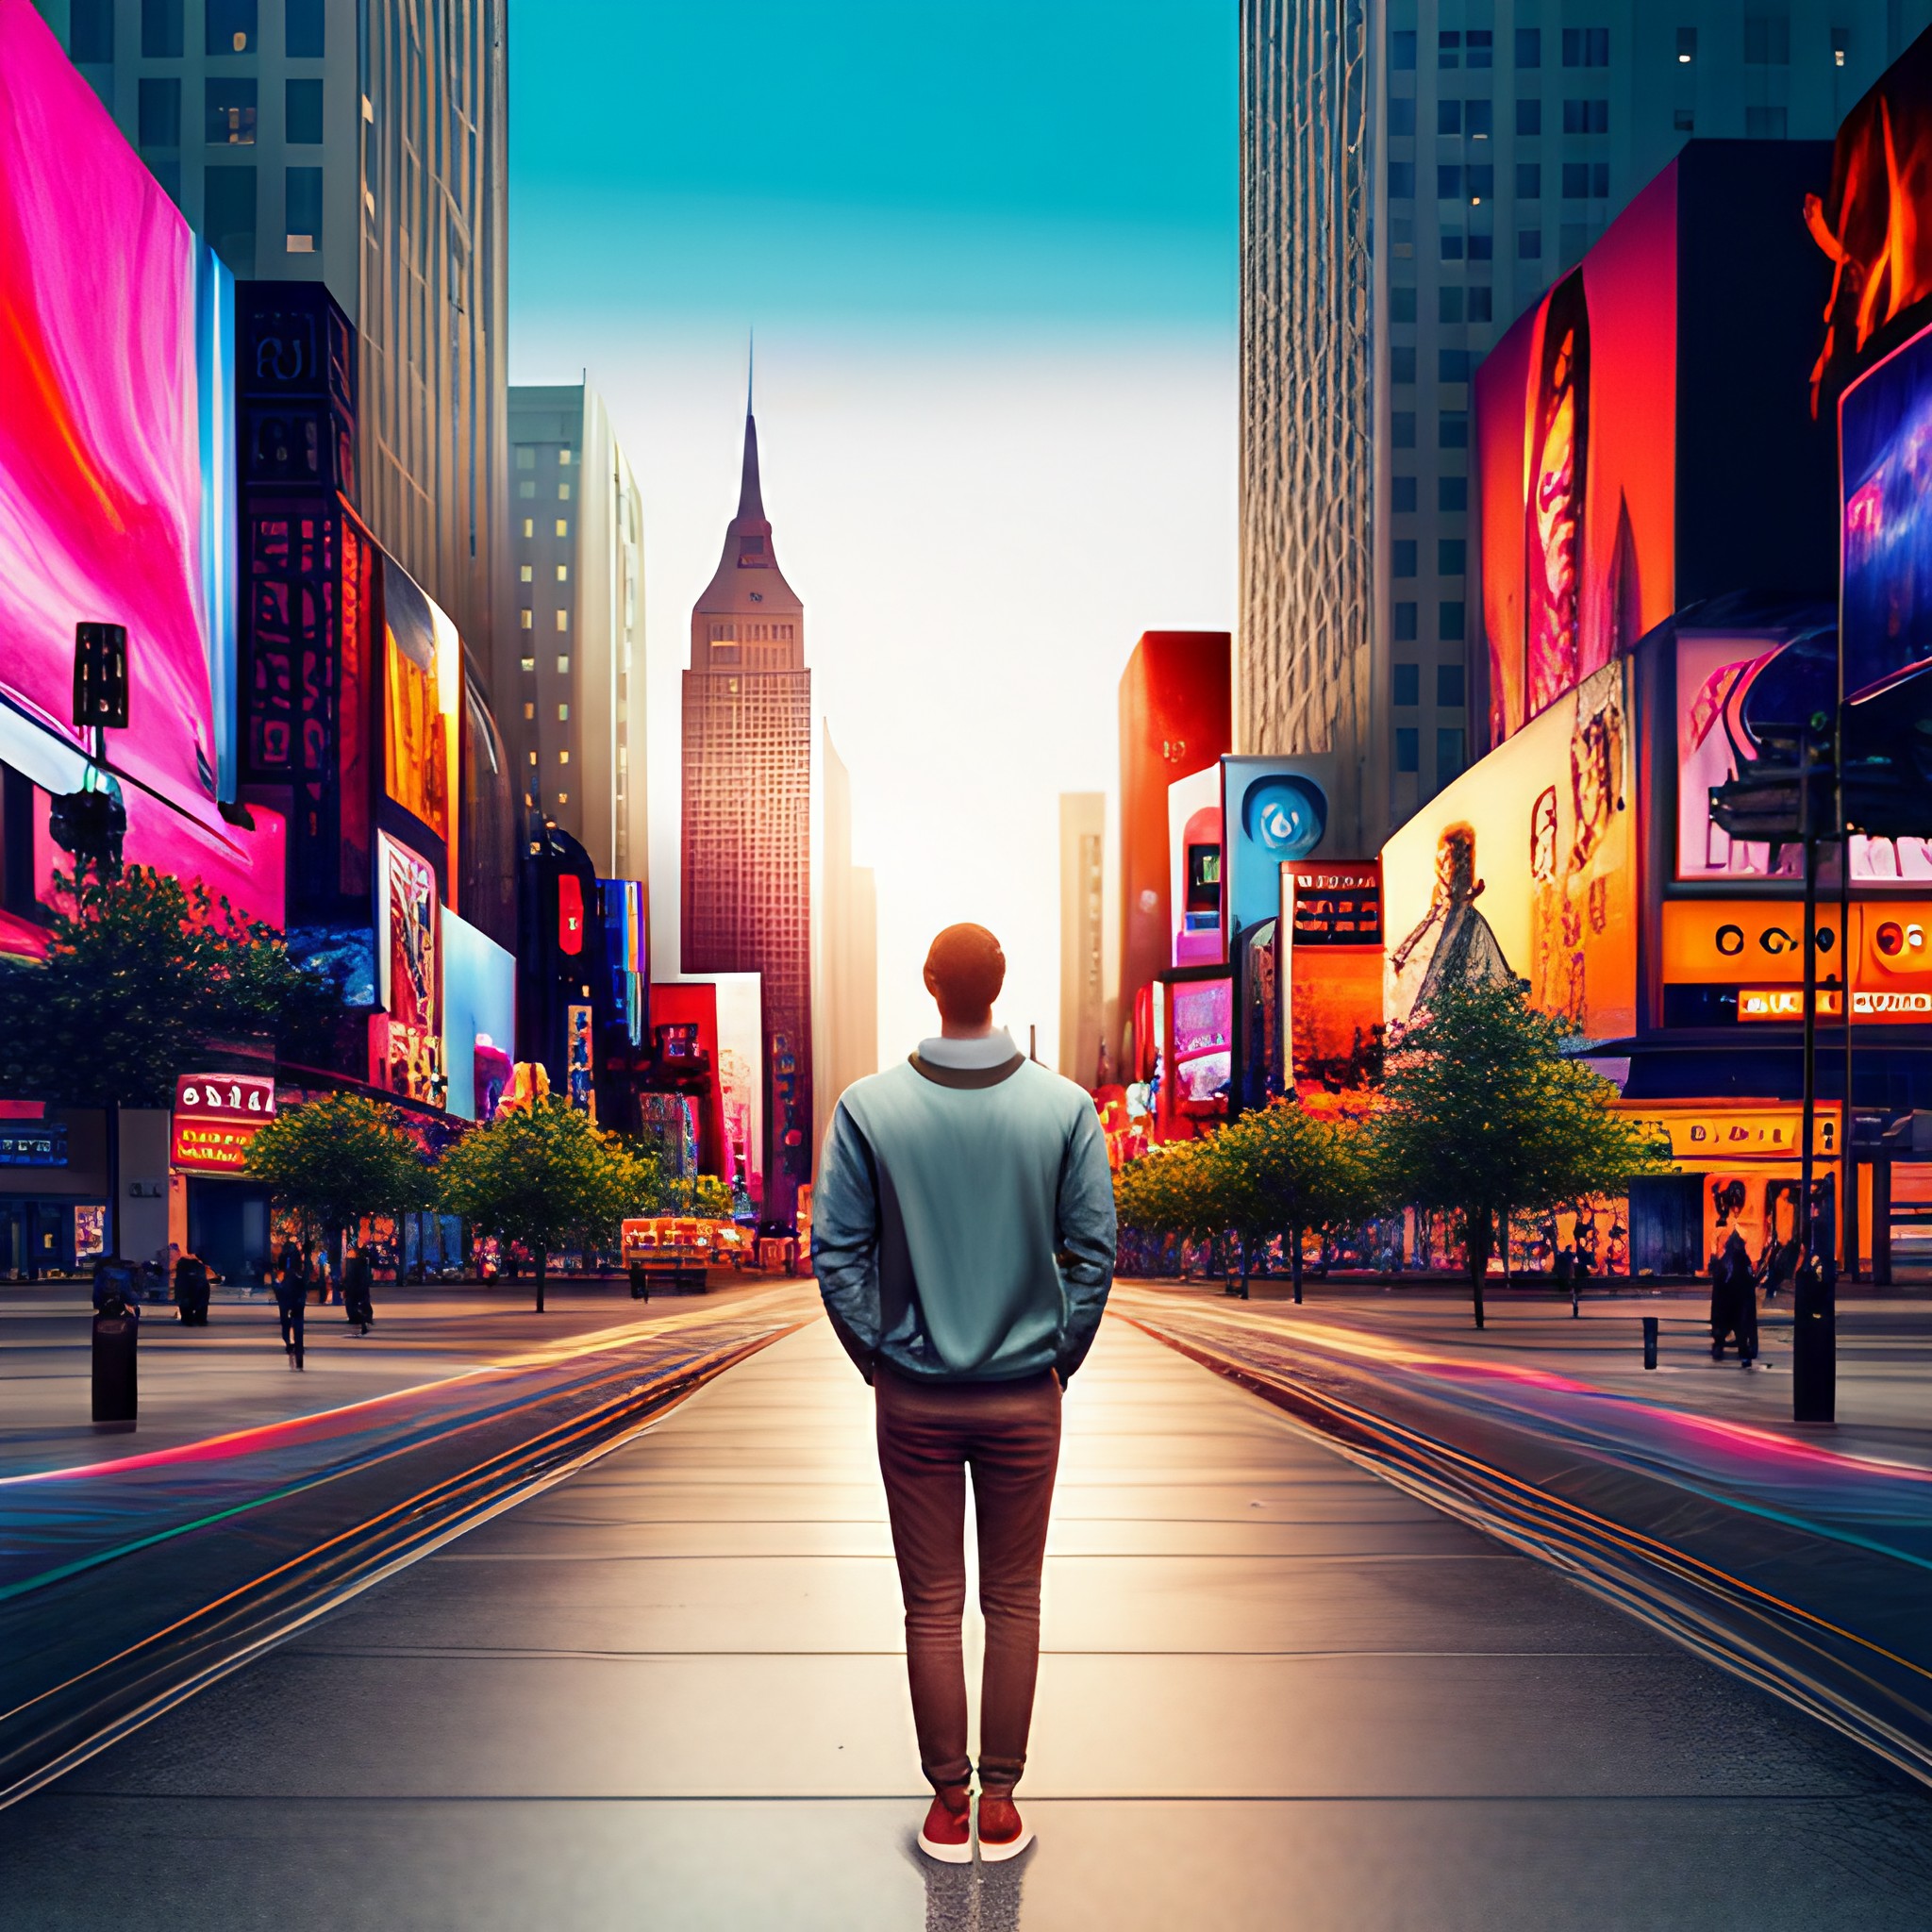 photorealistic digital artwork that features a person standing in a vibrant city, looking up at towering buildings and billboards